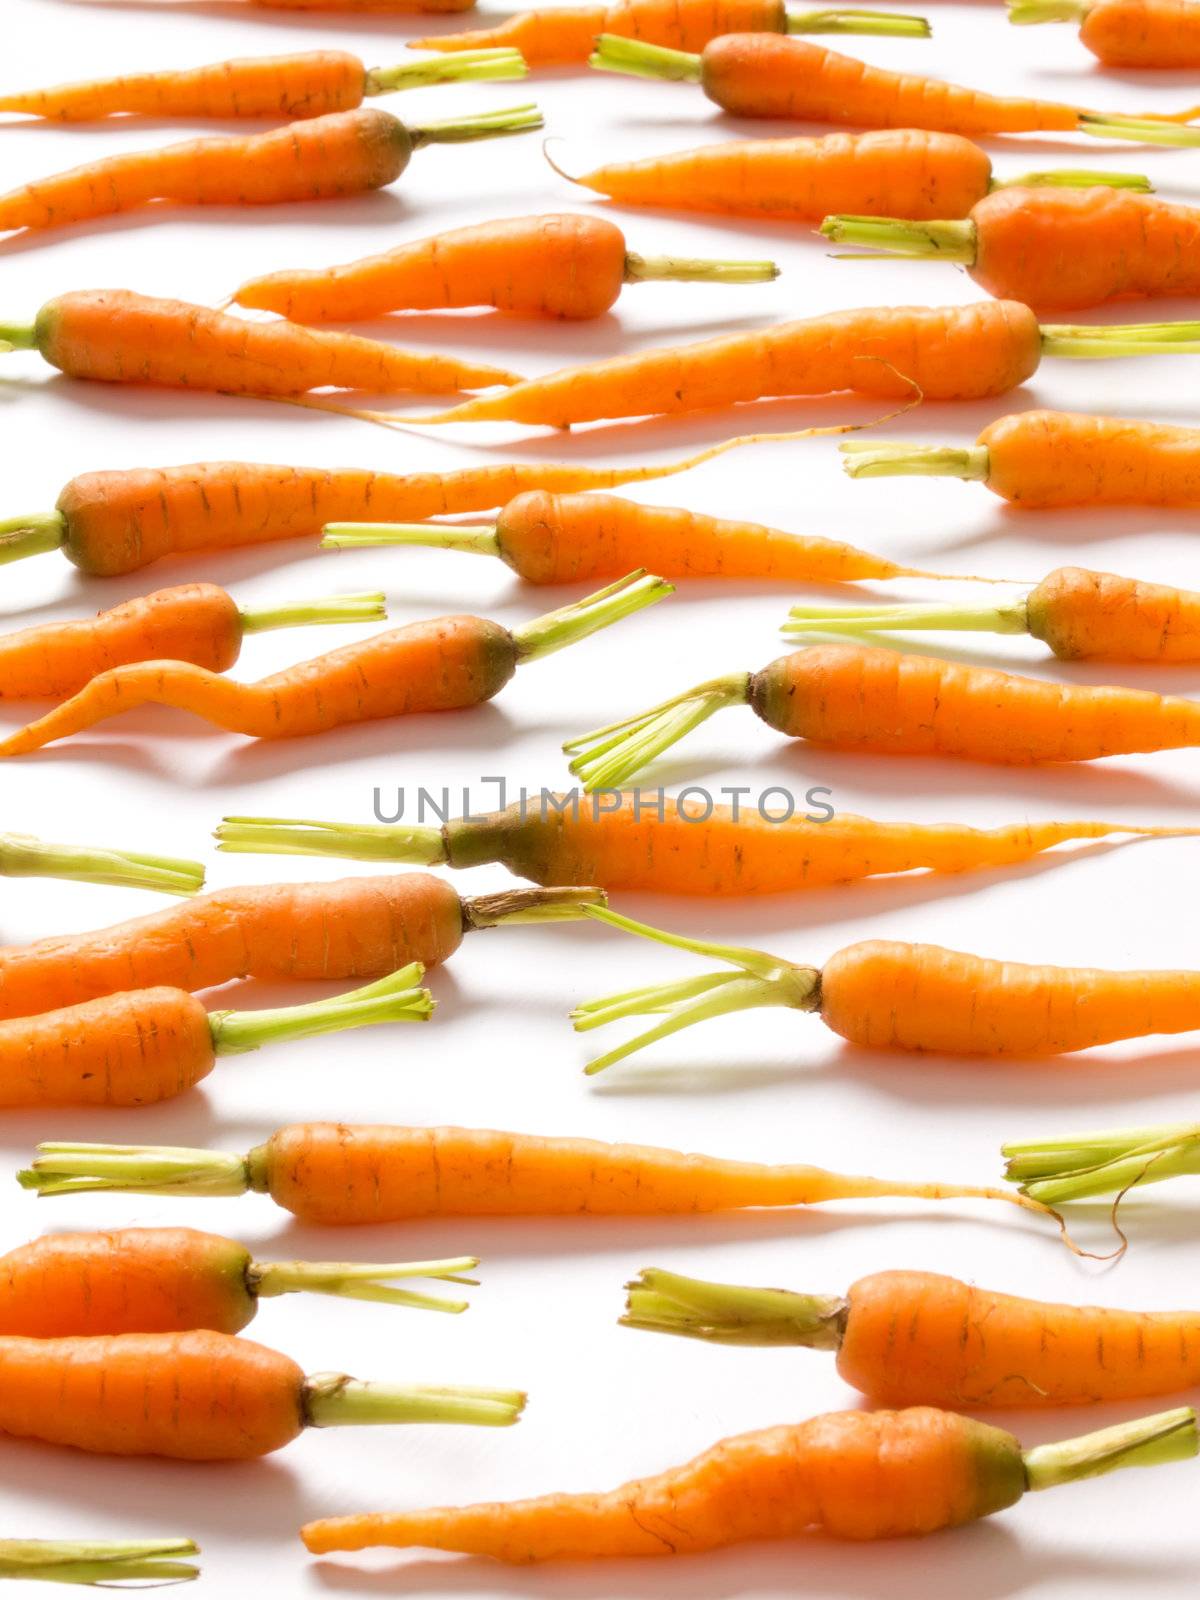 baby carrots by zkruger